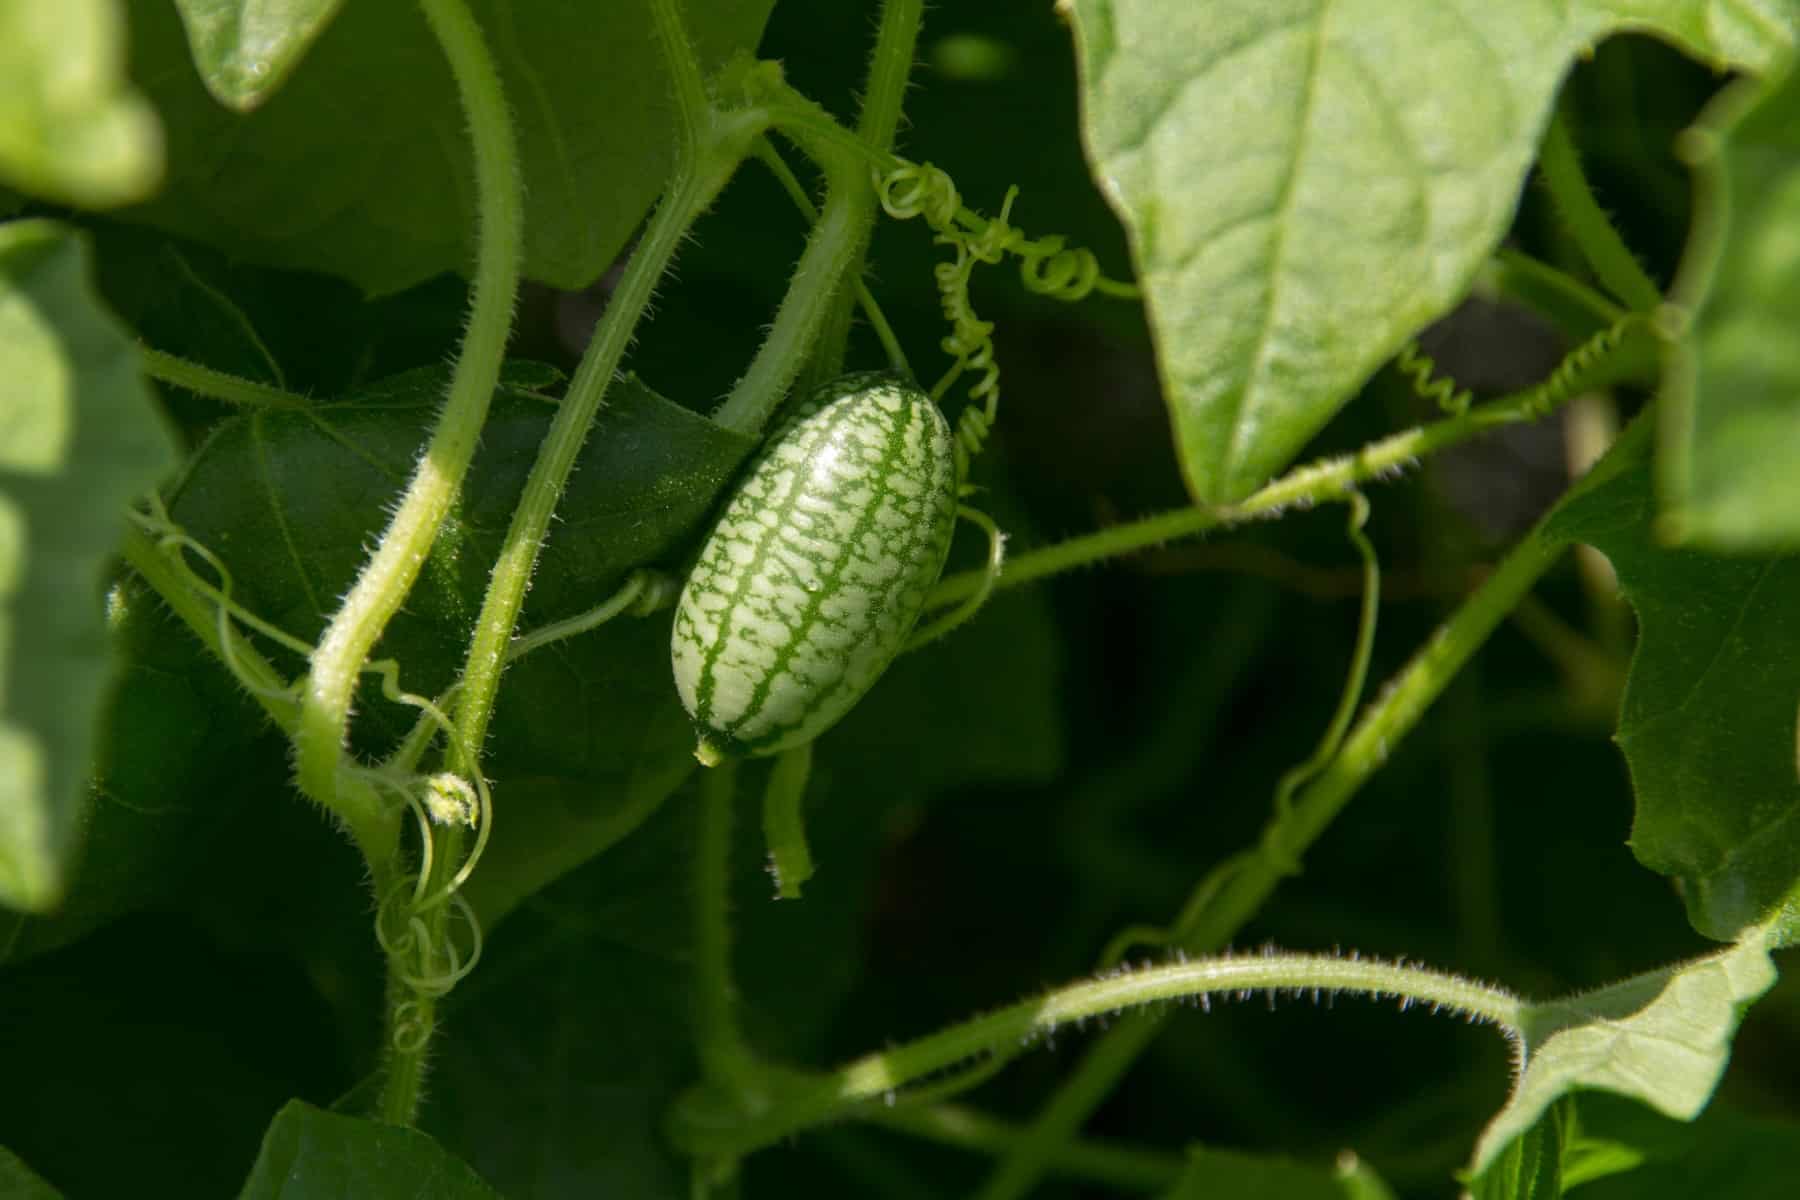 A little cucamelon on a branch with leaves and vines.